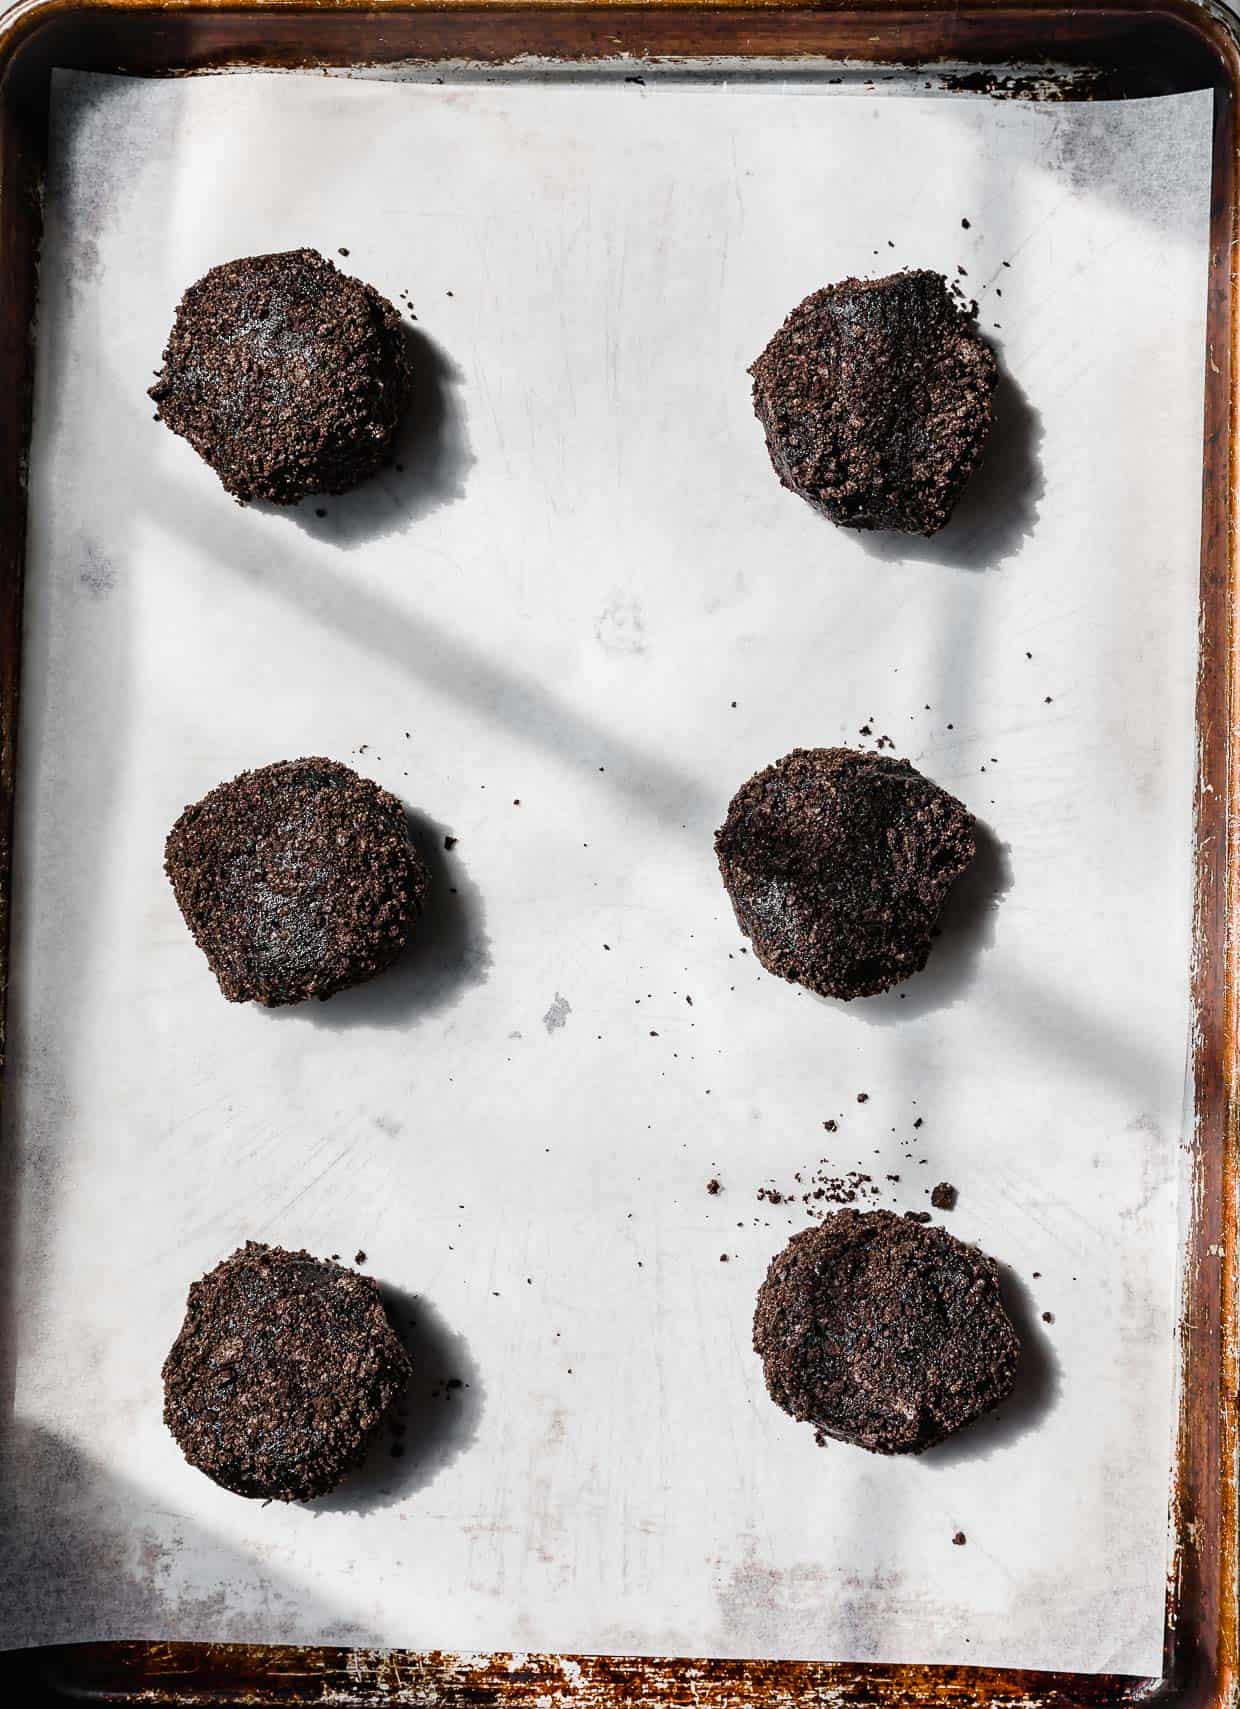 Six black Dirt Cake Cookie dough balls on a white parchment lined baking sheet.